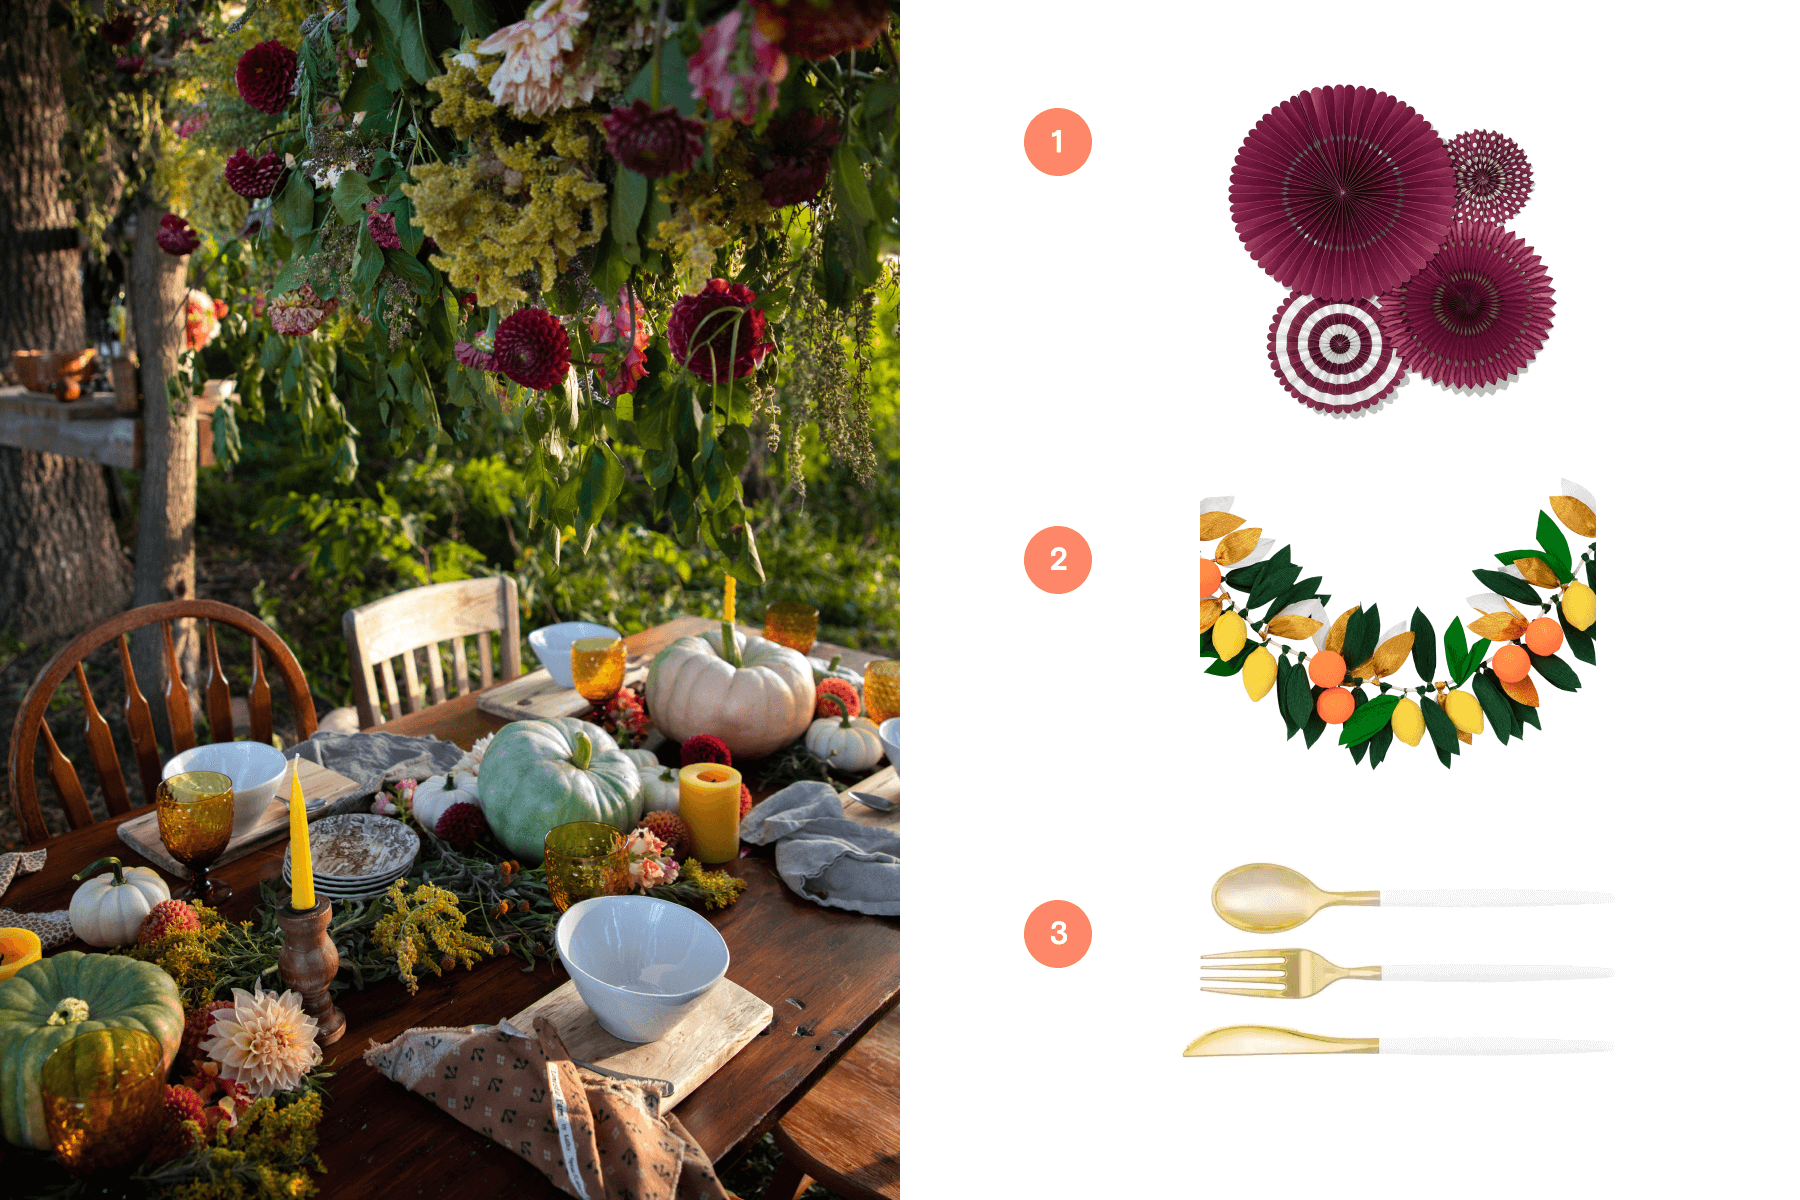 Left: An outdoor wooden table is set with colorful gourds, yellow candles, and a hanging floral arrangement. Right: Purple paper fans, a citrus fruit garland, and gold and white cutlery. 